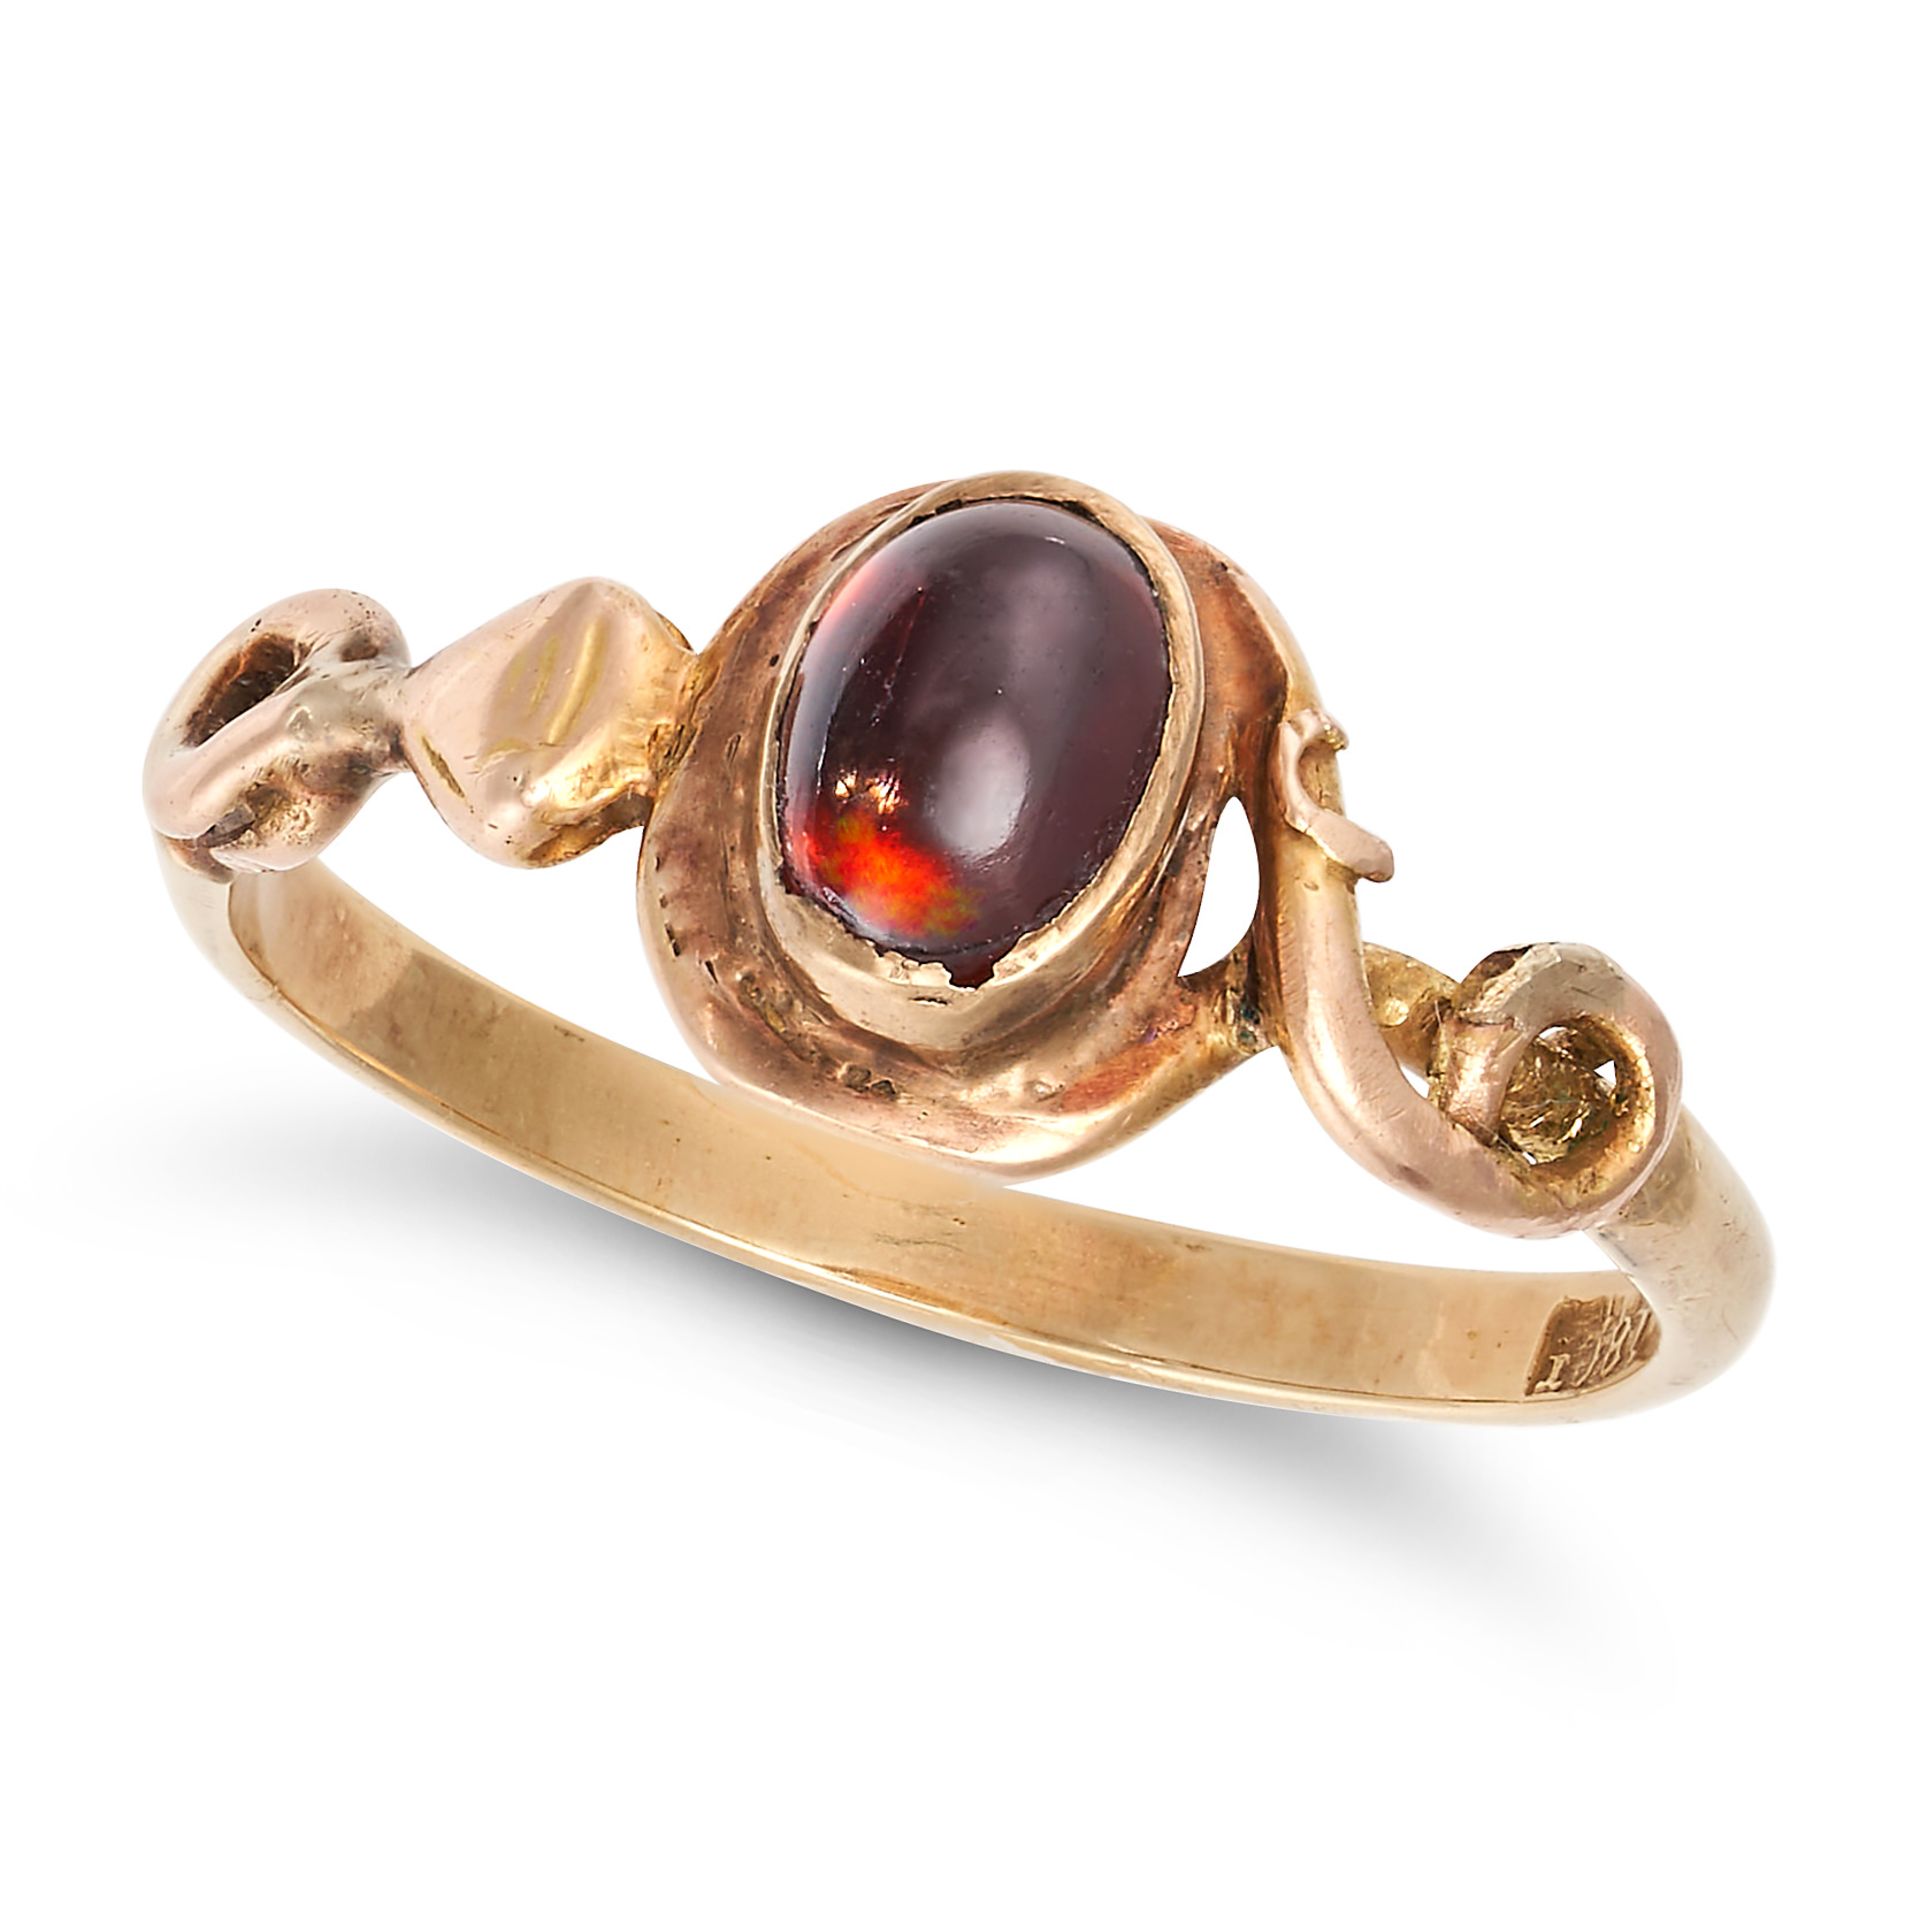 NO RESERVE - A GARNET RING in 18ct yellow gold, set with an oval cabochon garnet, stamped 18CT, s...